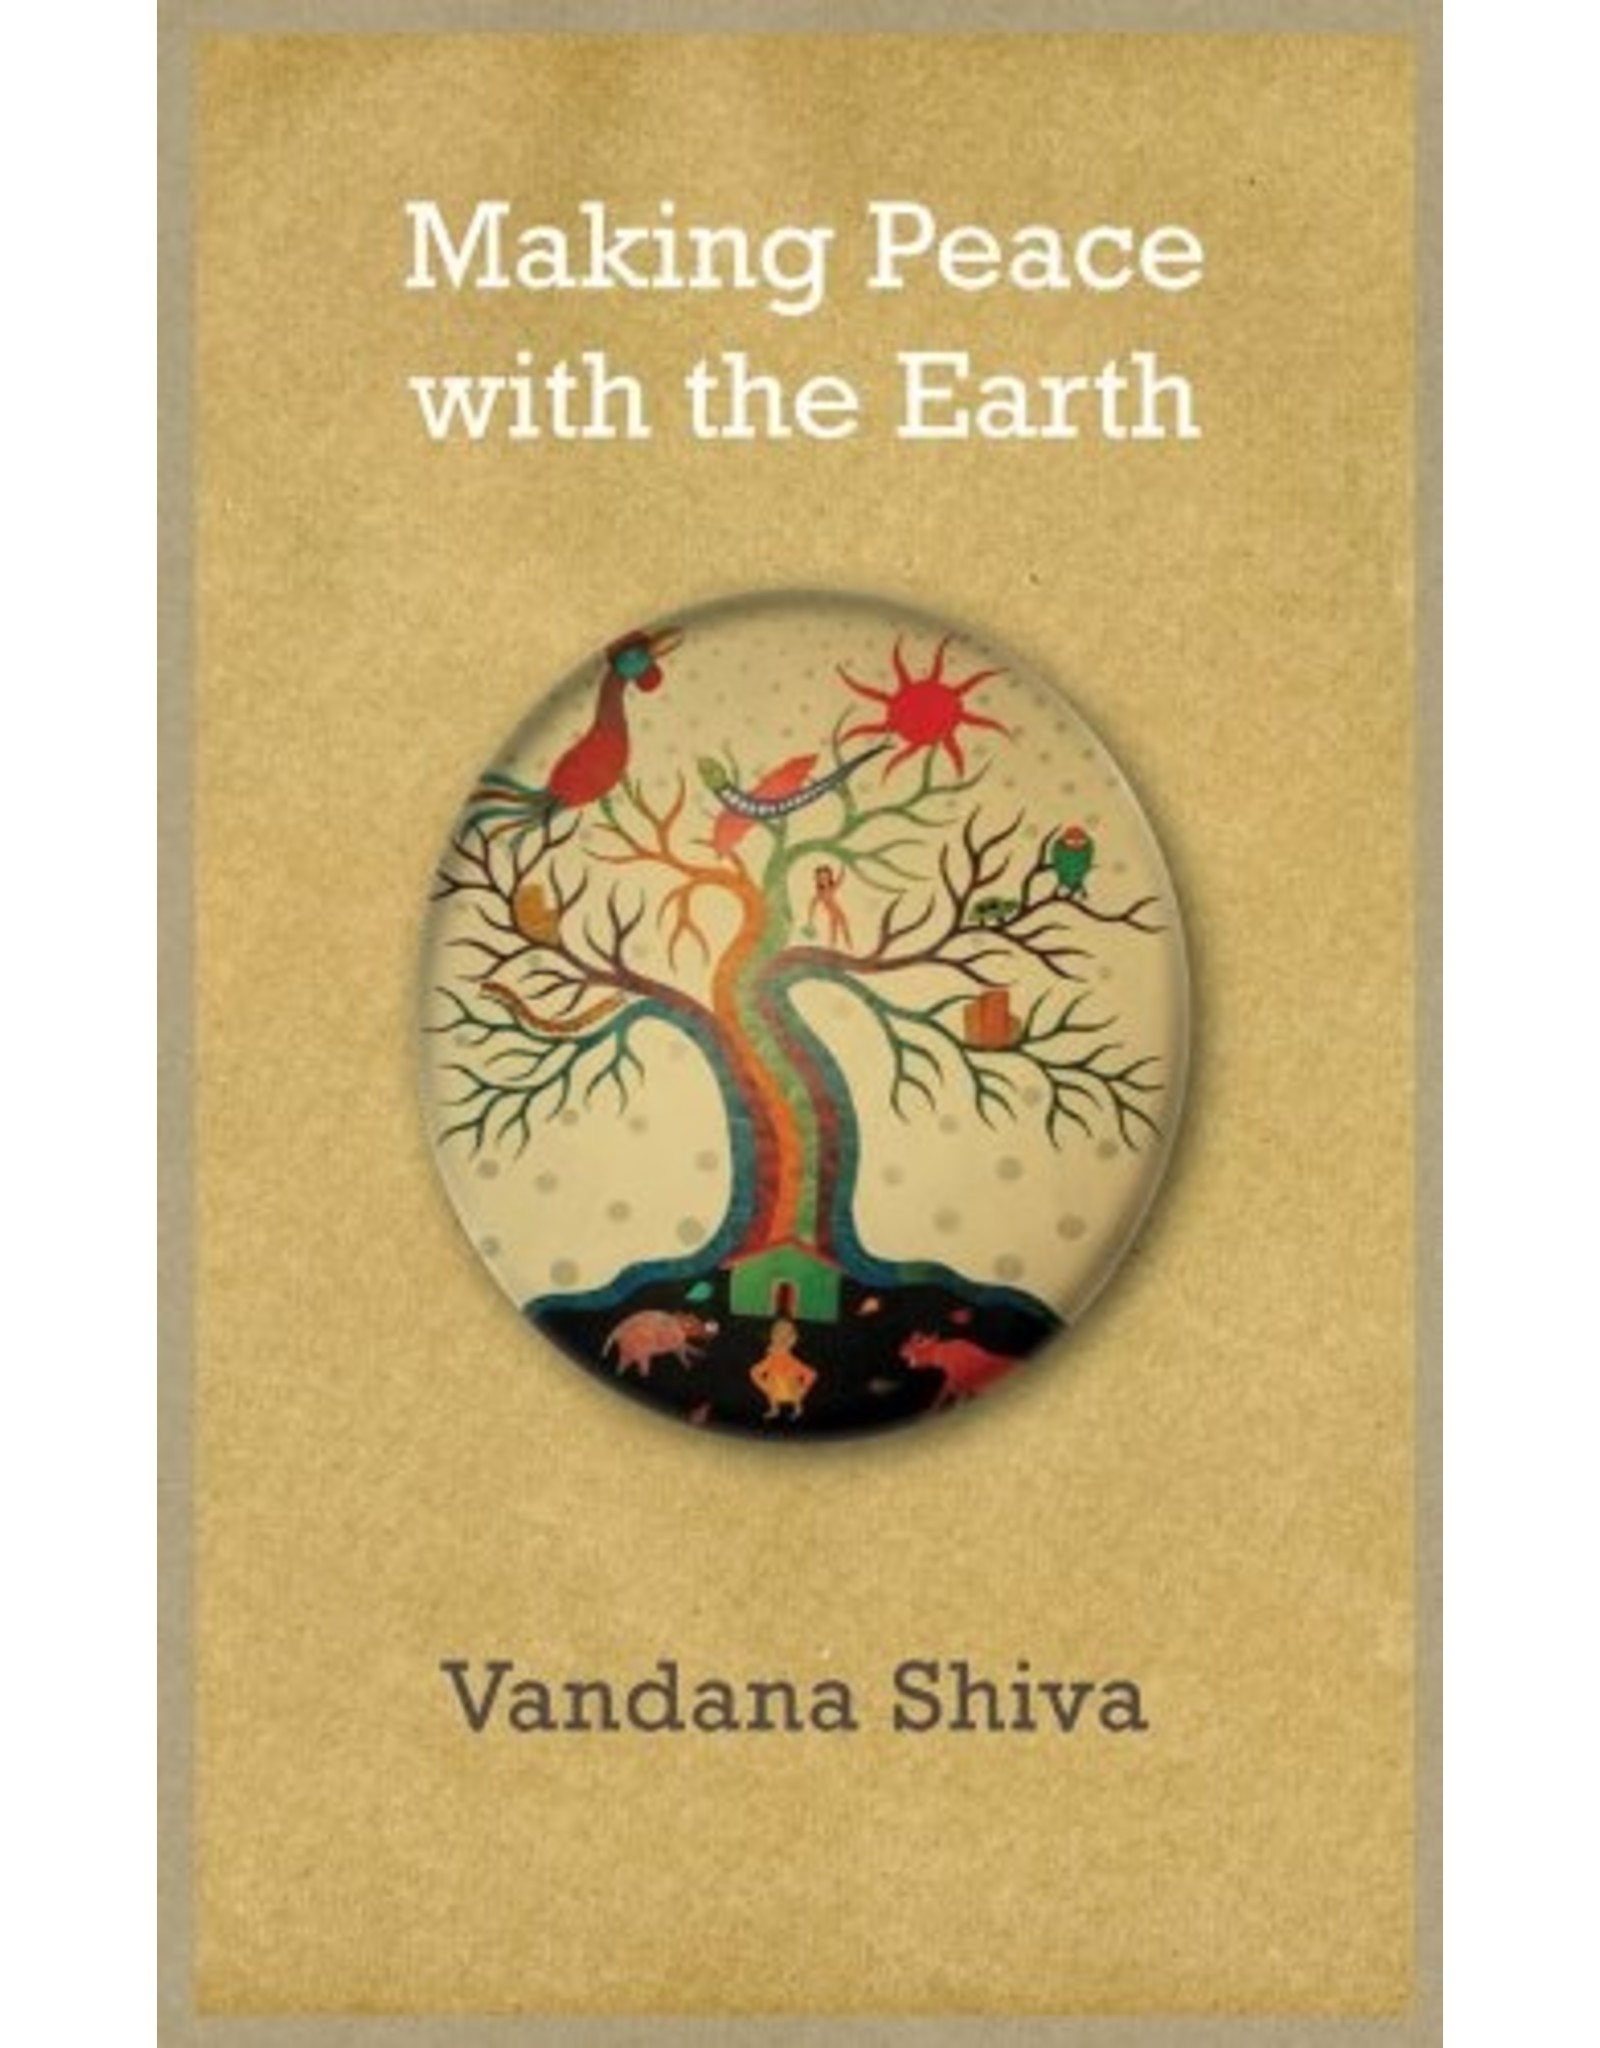 Literature Making Peace with the Earth